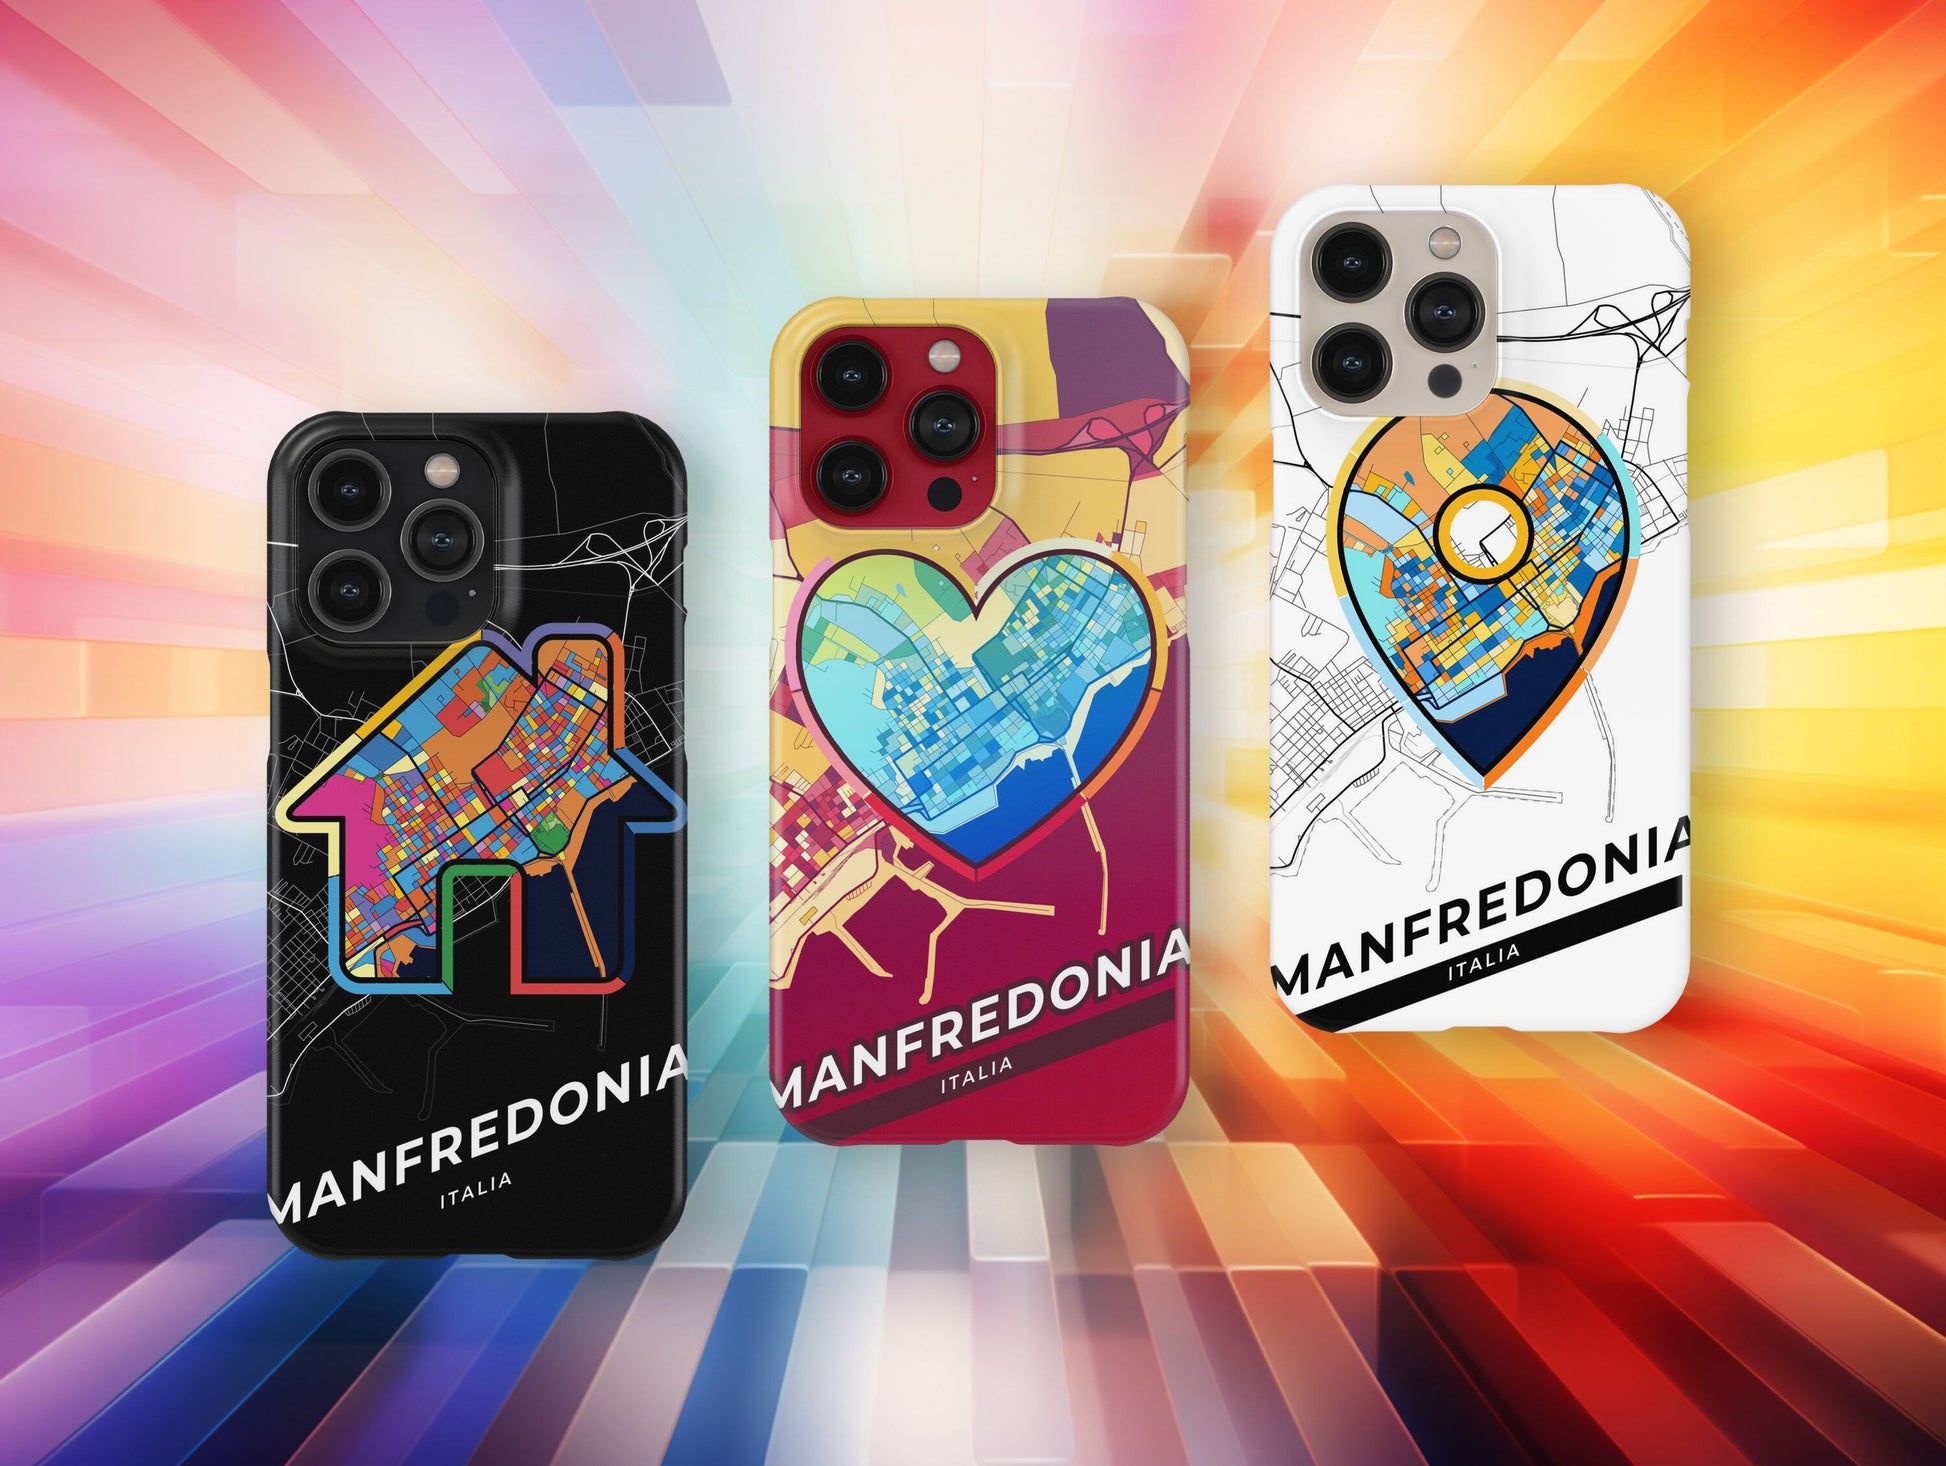 Manfredonia Italy slim phone case with colorful icon. Birthday, wedding or housewarming gift. Couple match cases.